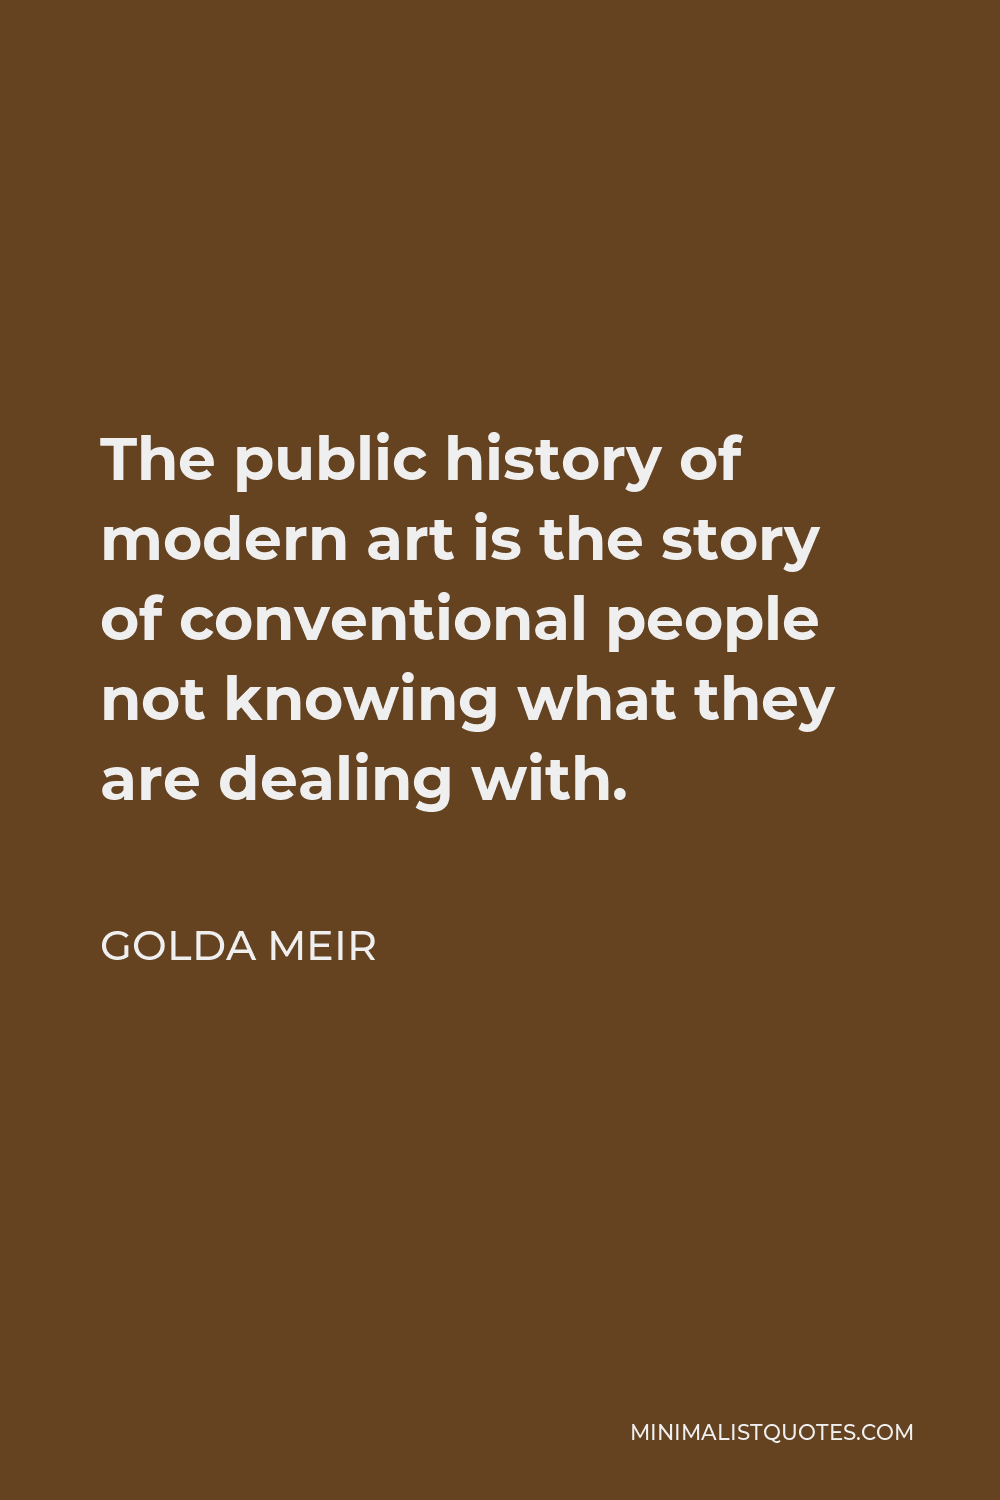 Golda Meir Quote - The public history of modern art is the story of conventional people not knowing what they are dealing with.